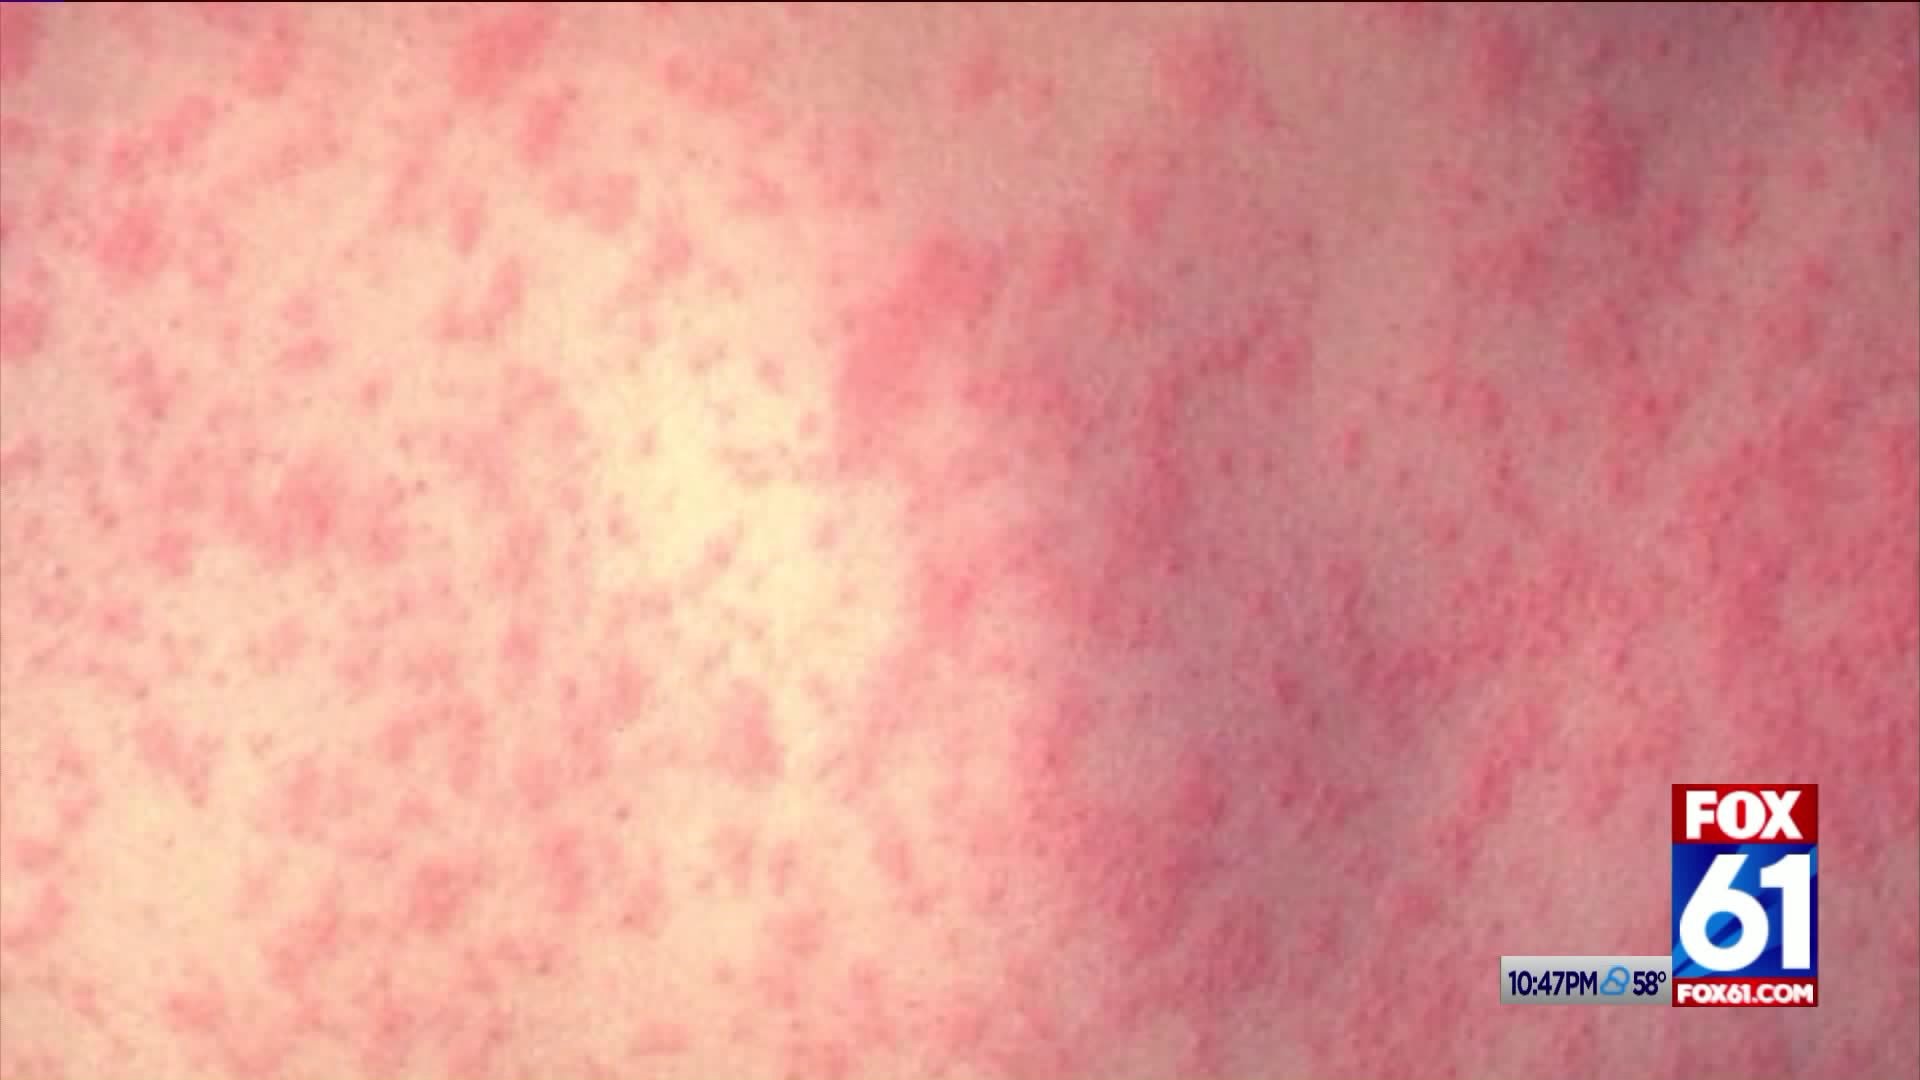 Just how likely is a Measles outbreak in Connecticut?